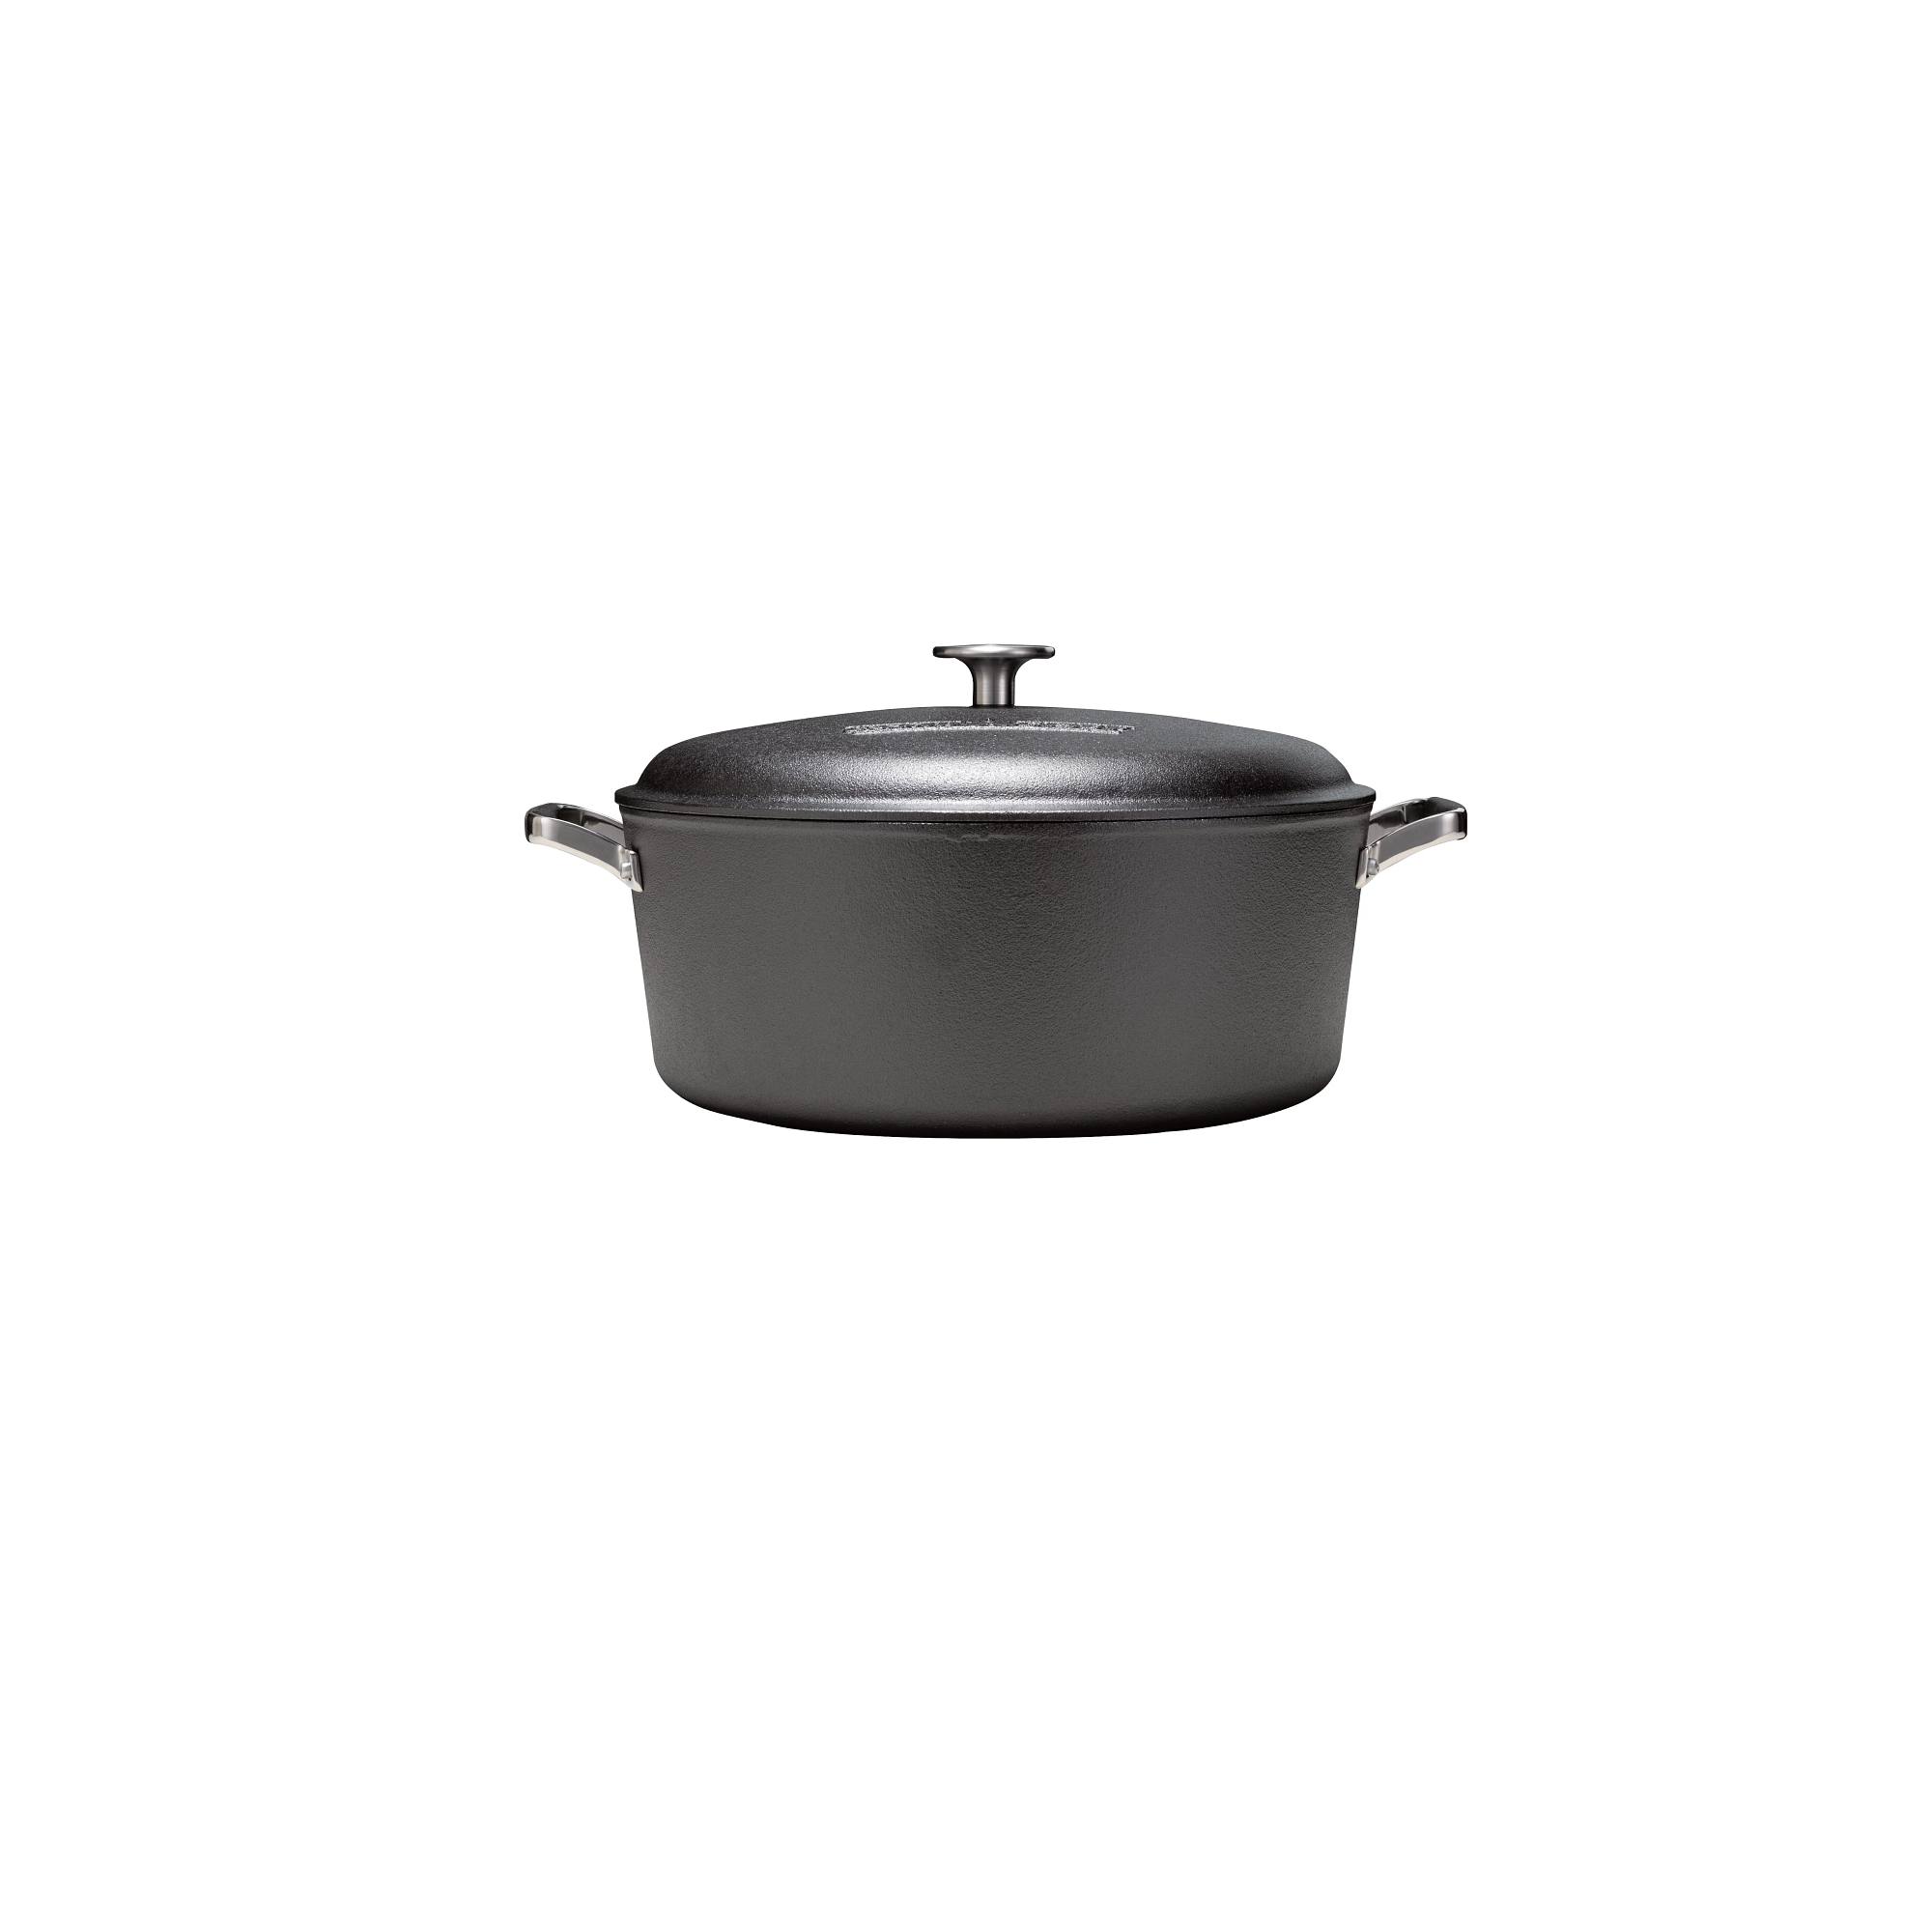 Camp Chef Heritage Dutch Oven 12